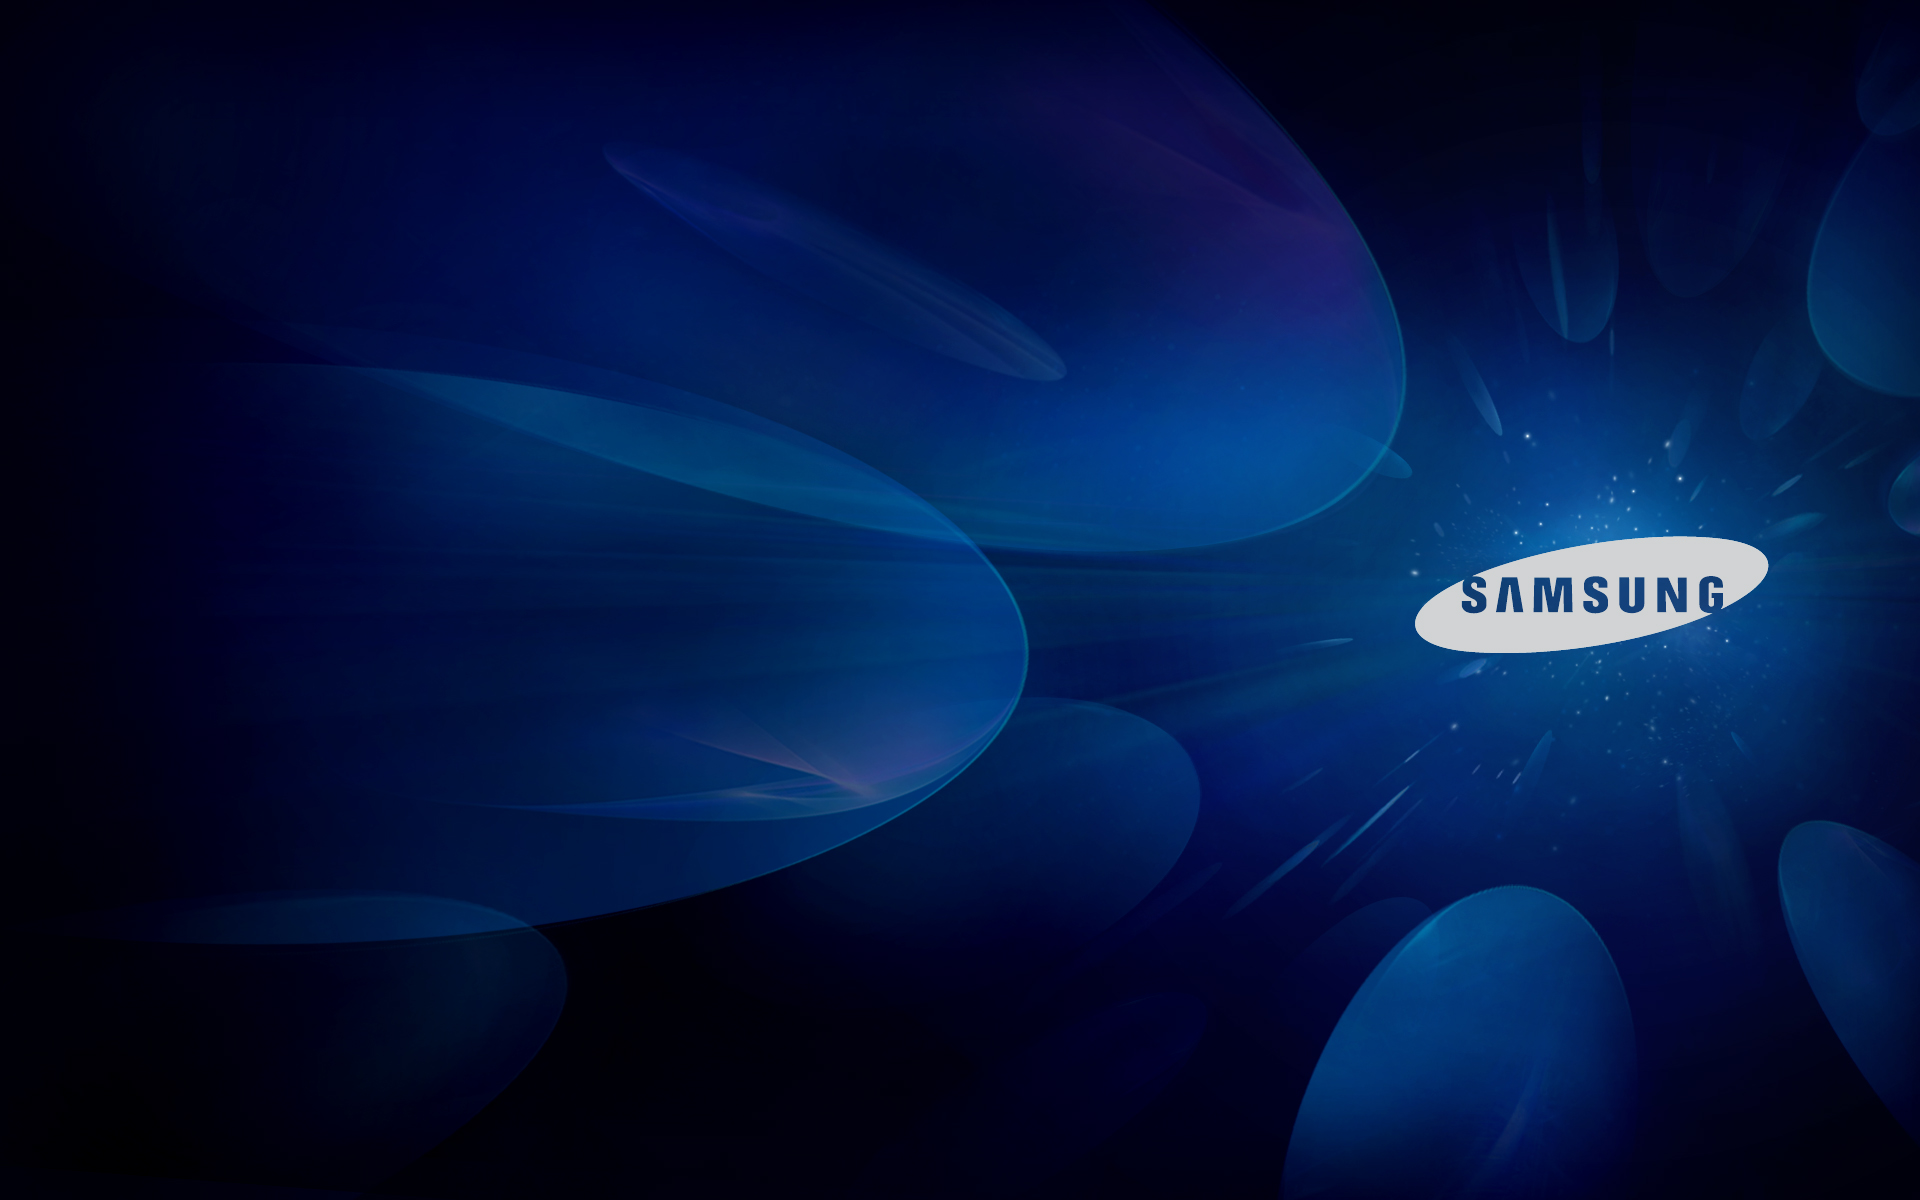 Samsung Wallpapers PC Doctor Ardee 1920x1200